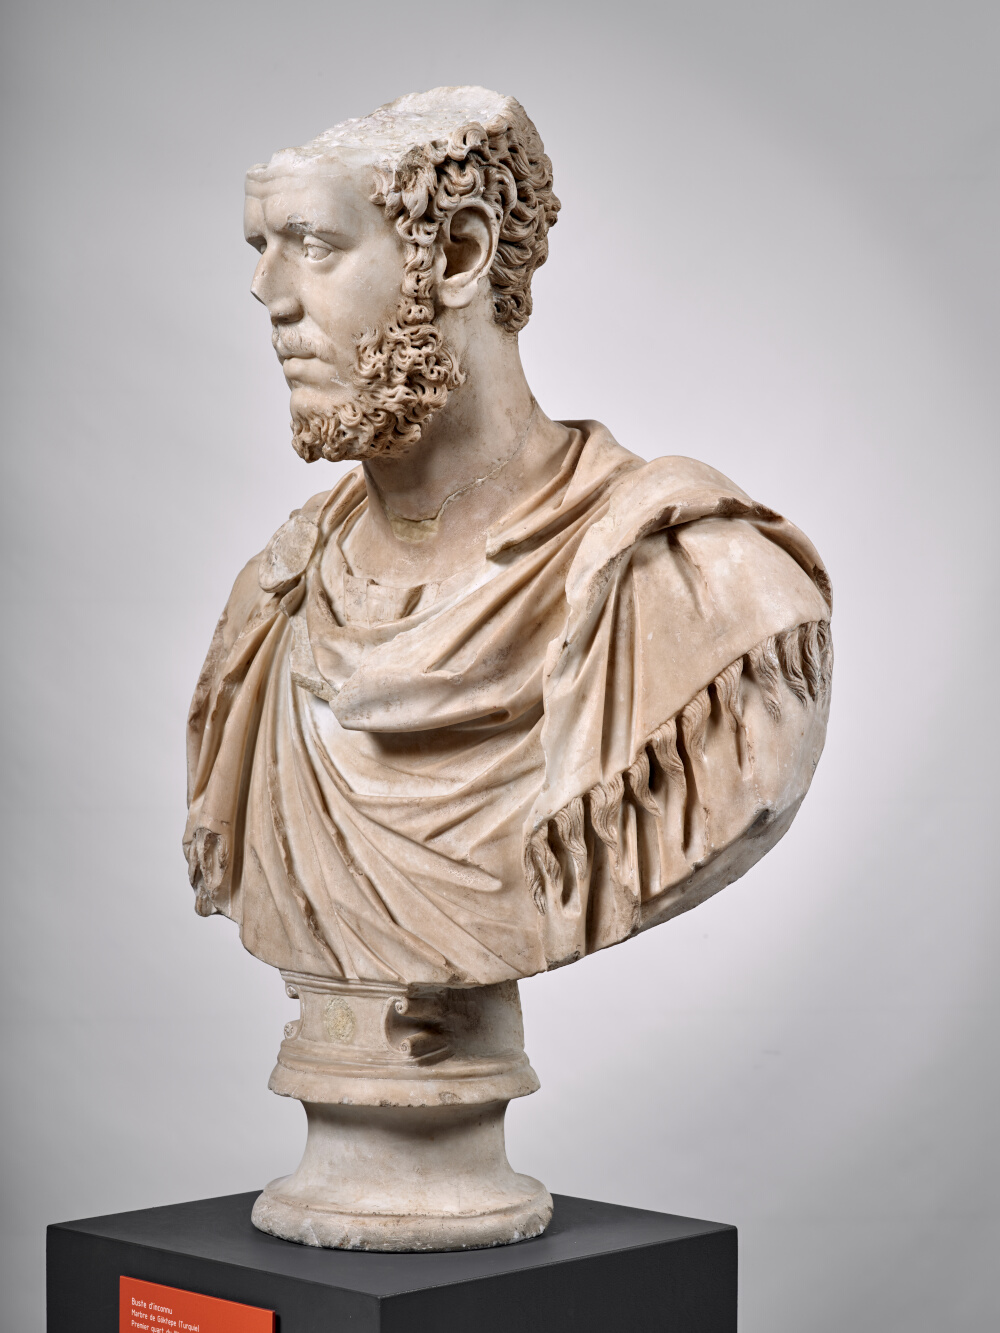 Bust of a high-ranking official of the Empire wearing a fringed paludamentum